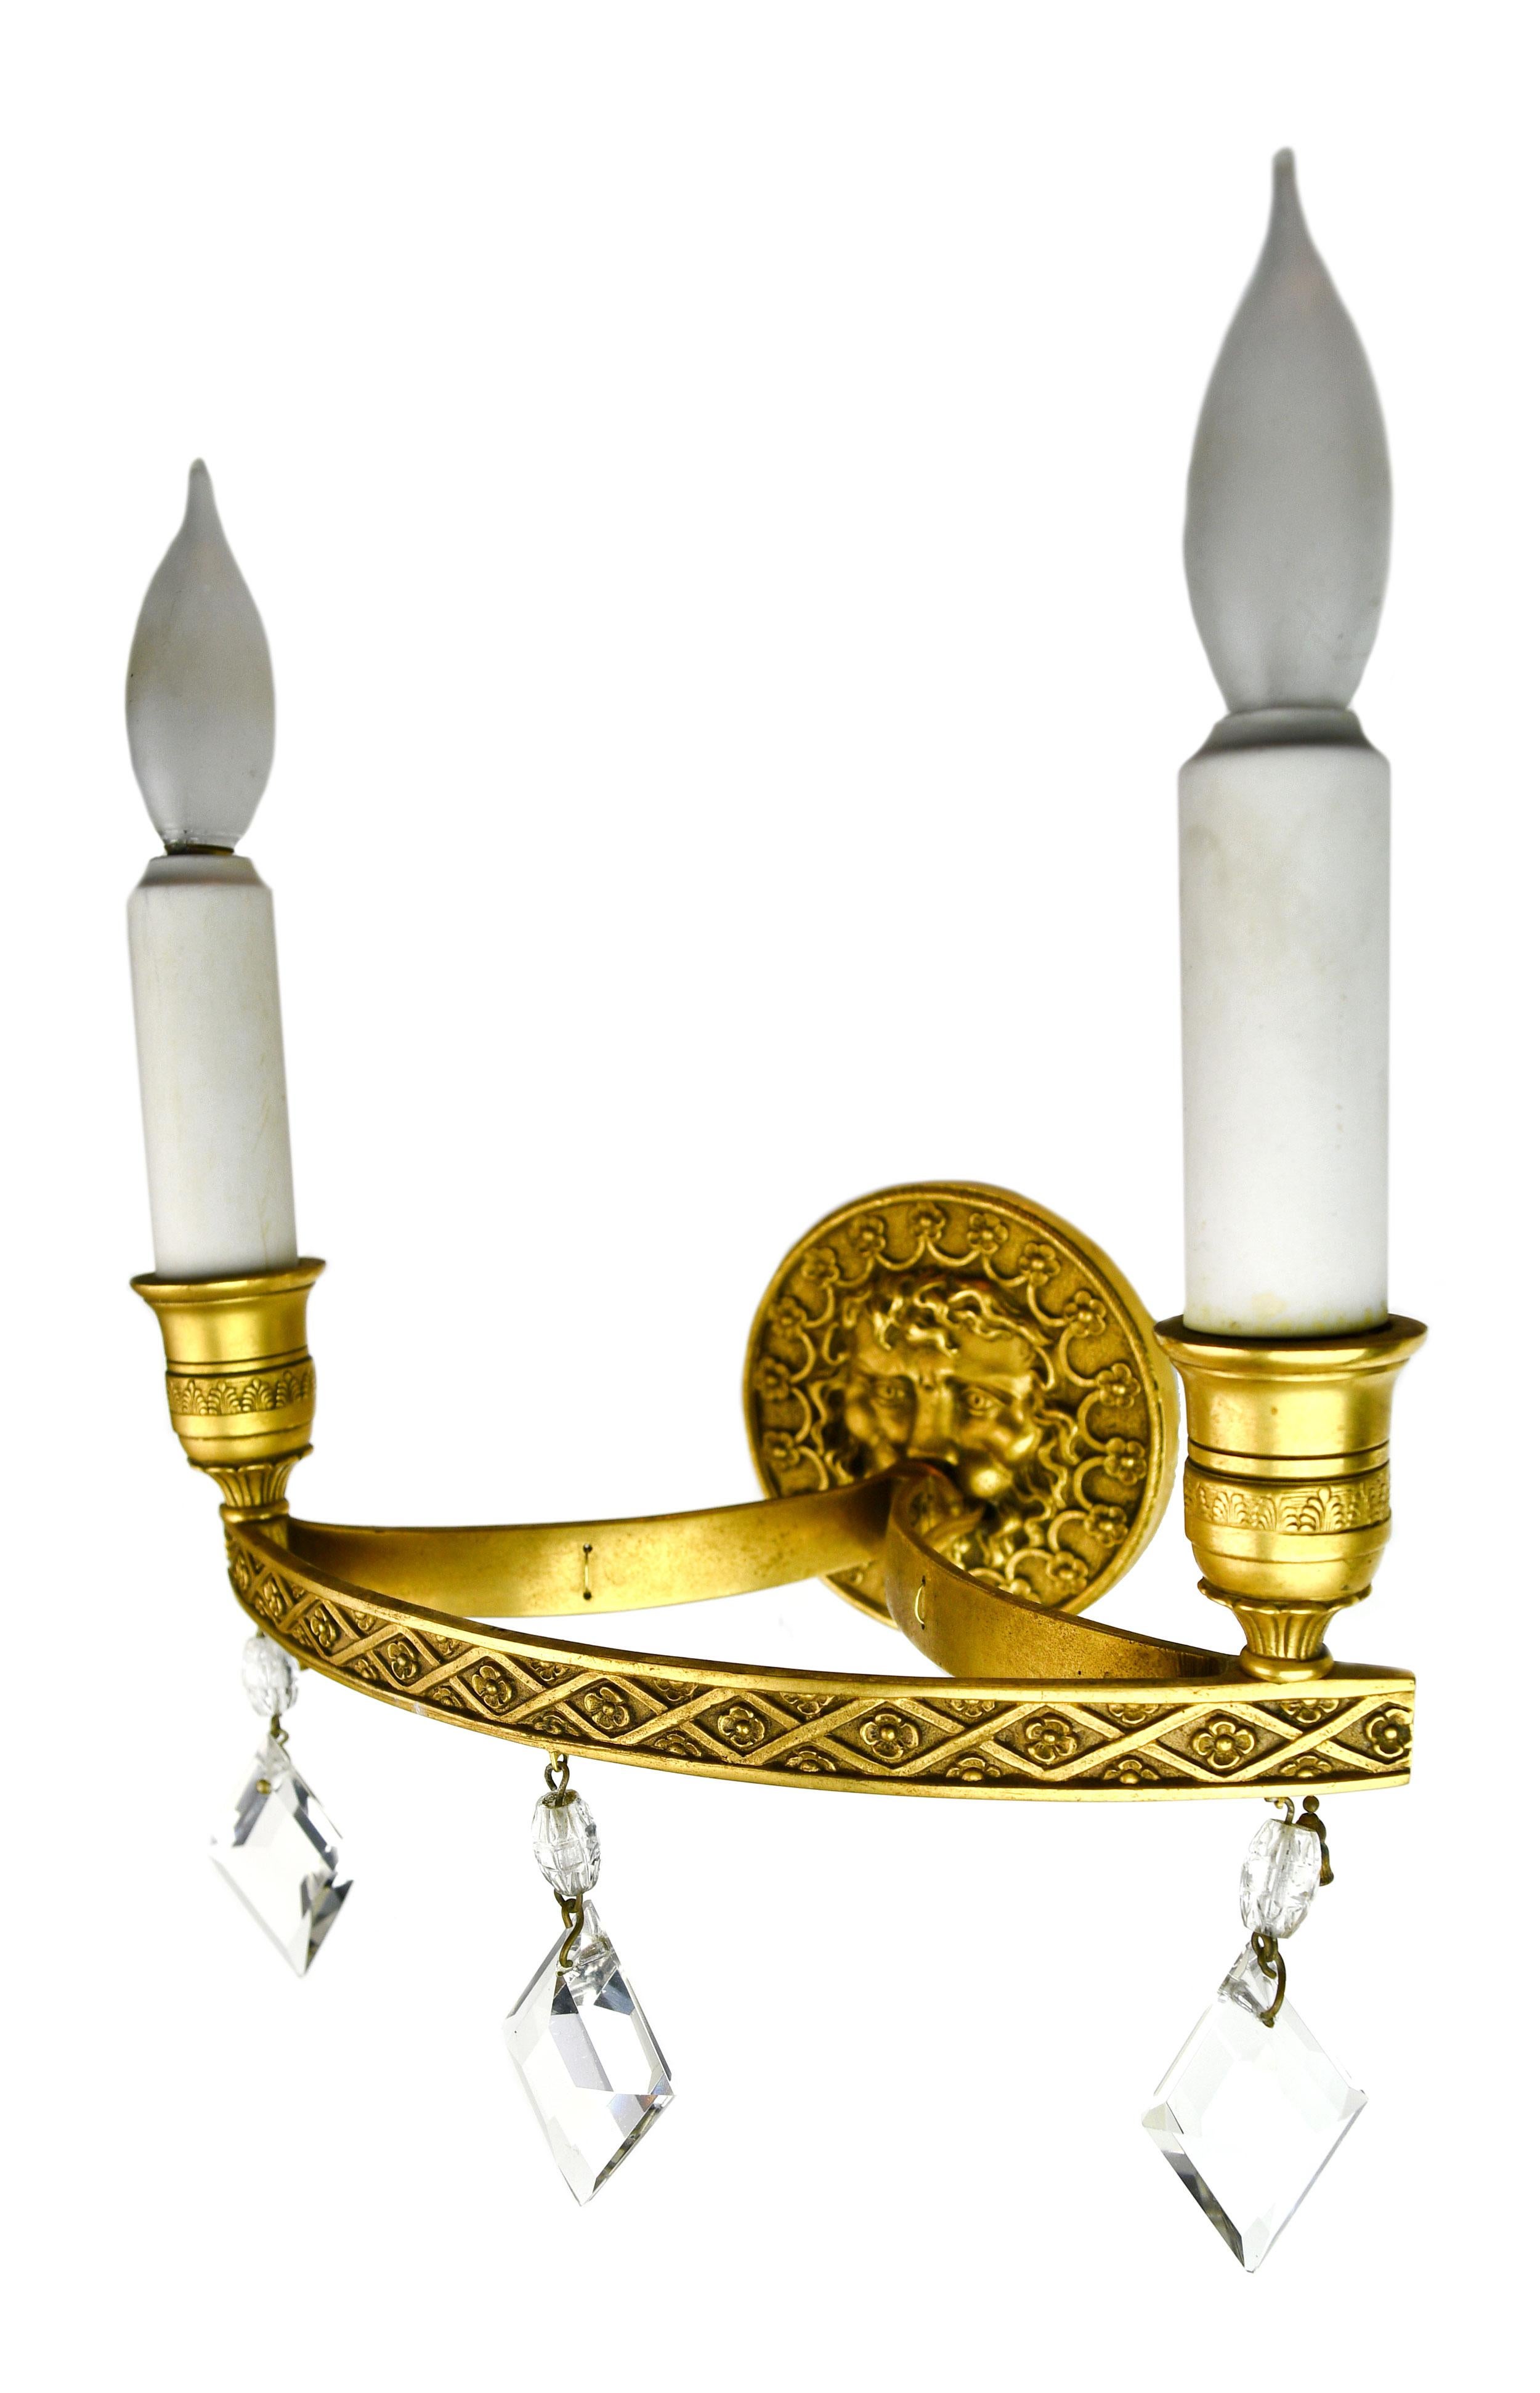 Empire Revival Edward F. Caldwell Brass Sconce with Wind God Design For Sale